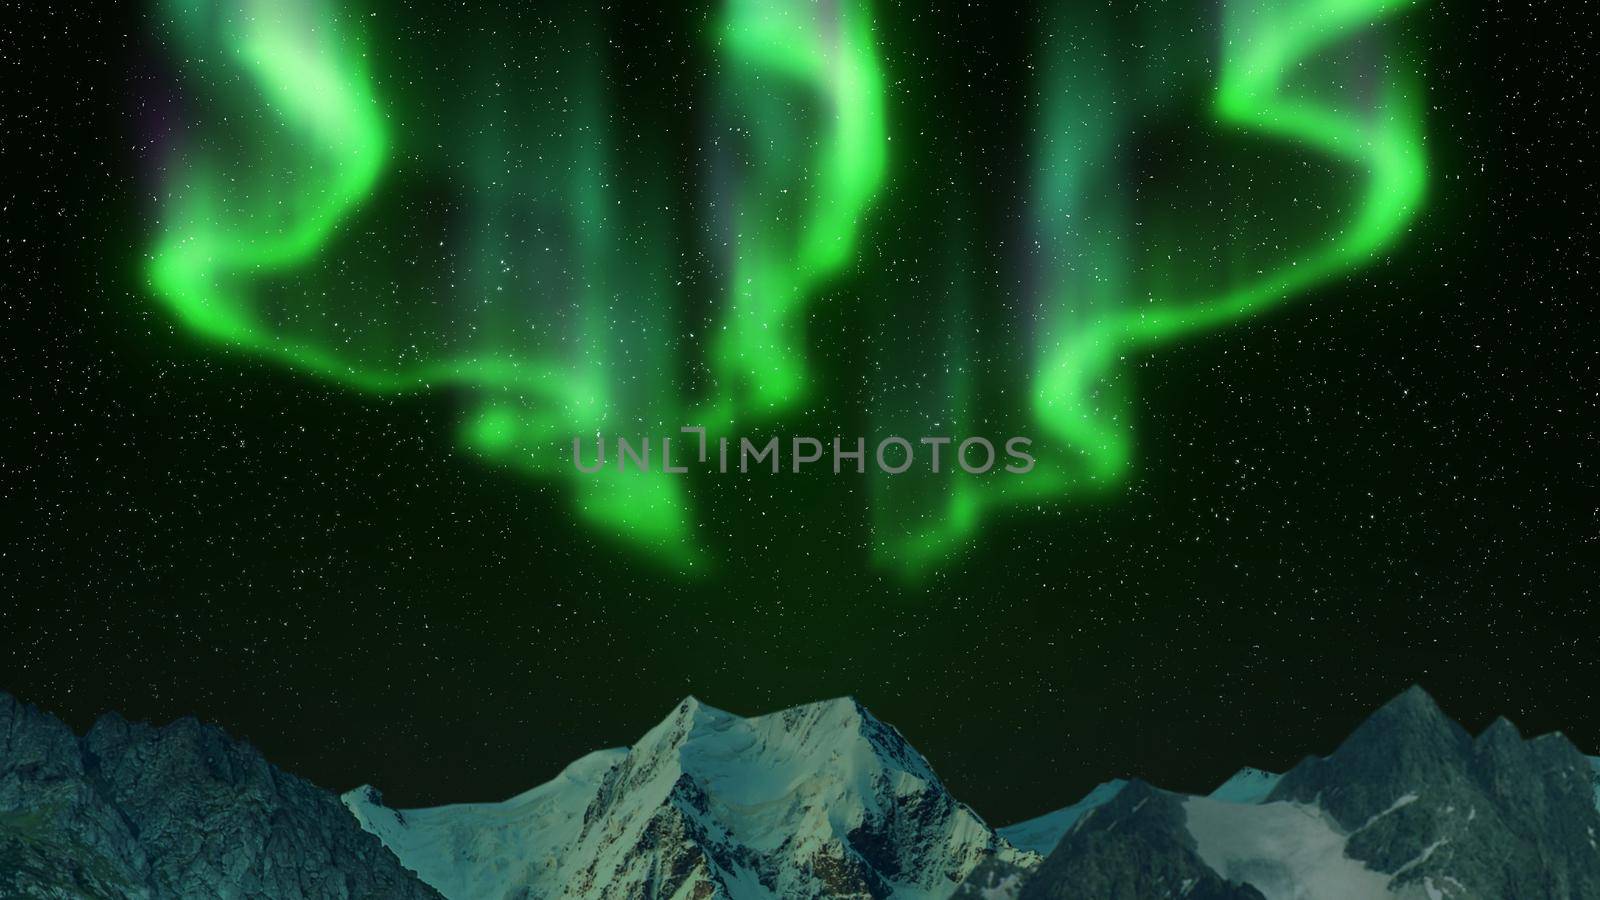 Northern Lights in the mountains bkacground abstract by studiodav